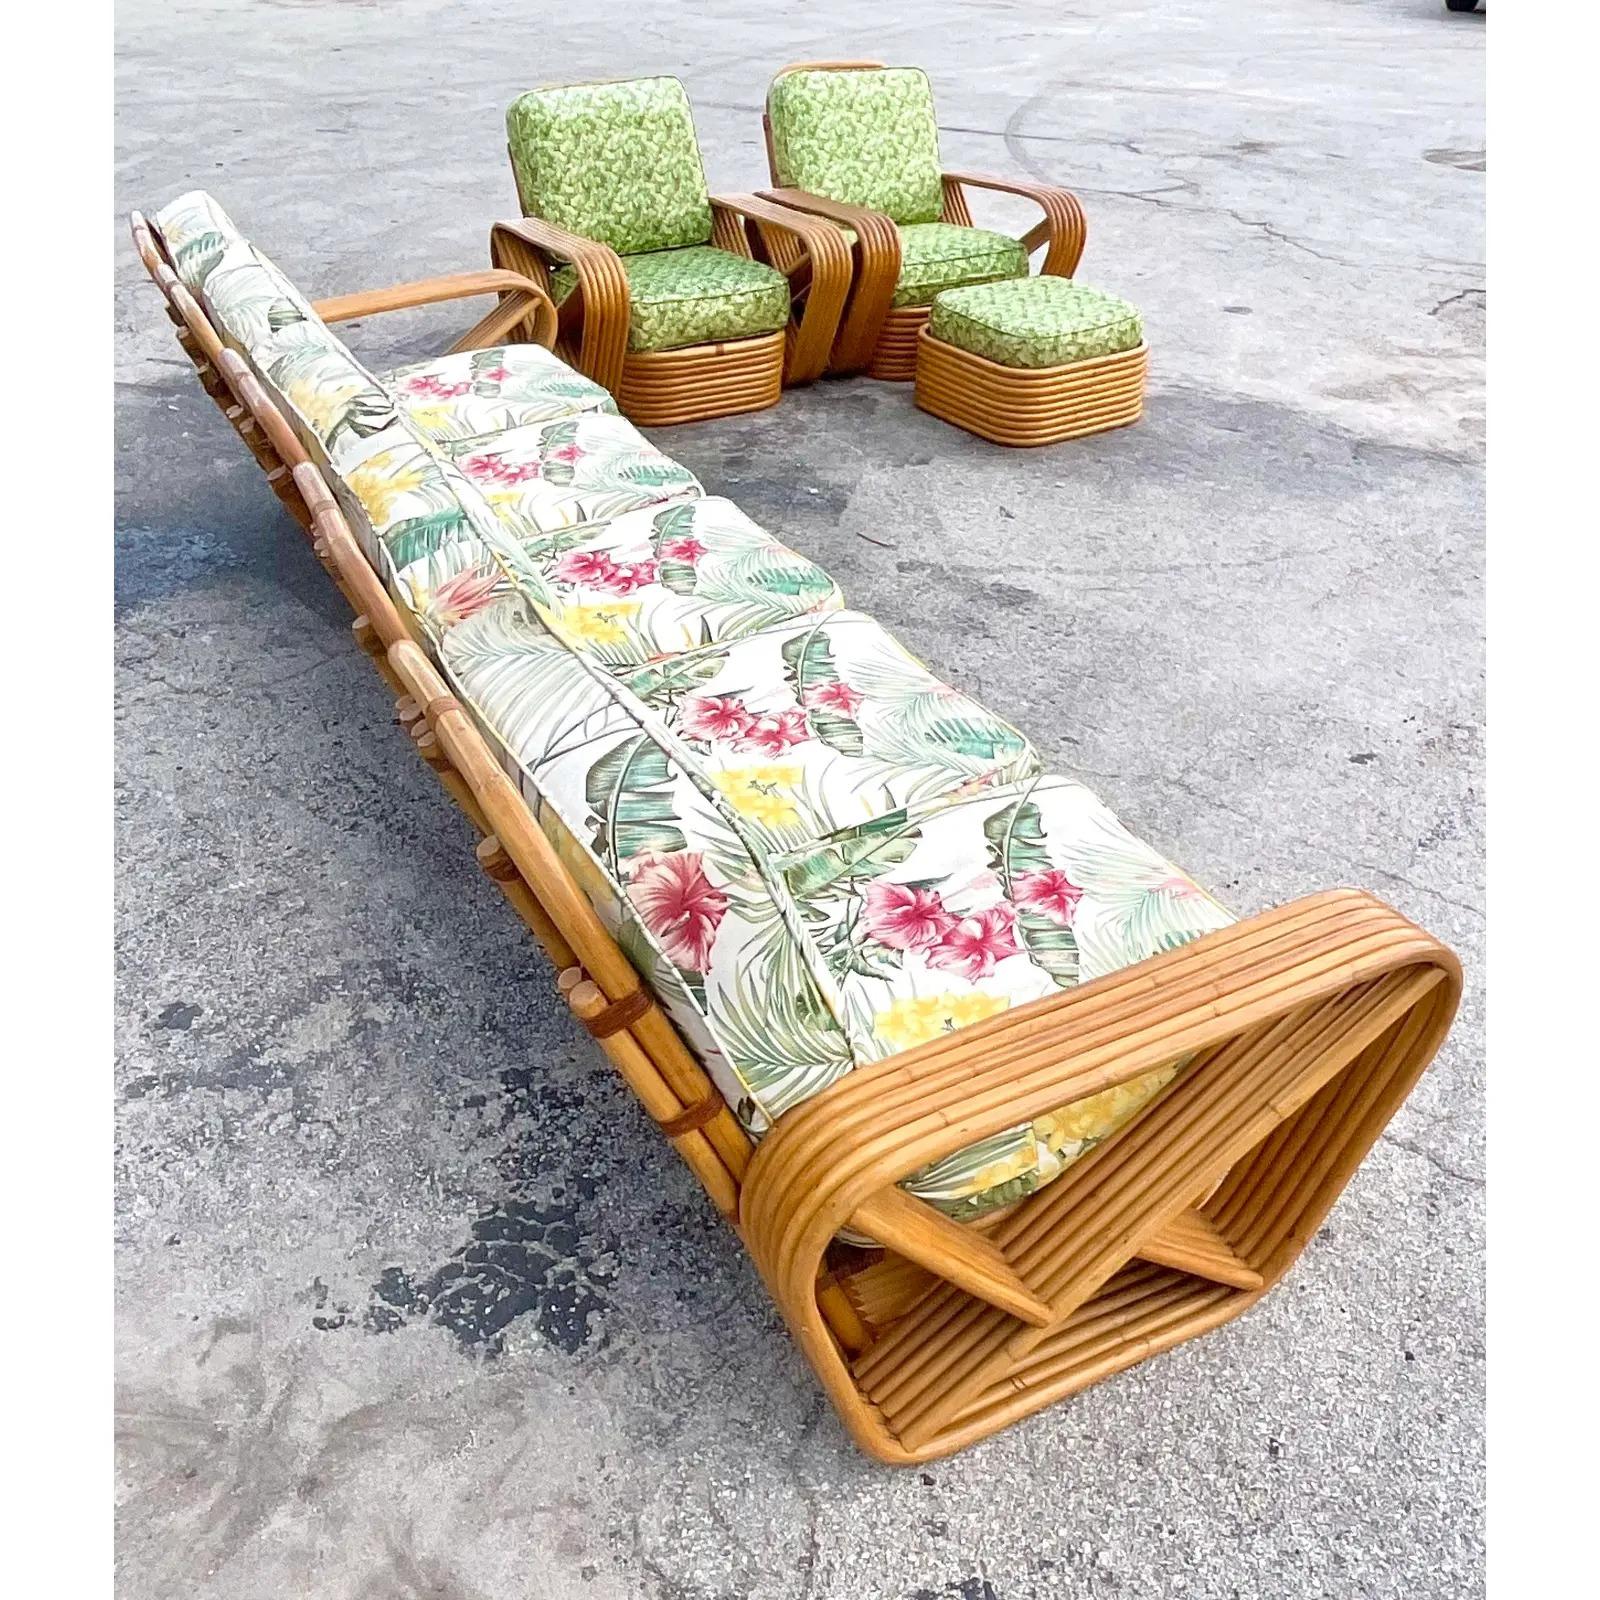 A fantastic pair of vintage Coastal lounge chairs. Made by the iconic Paul Frankl. The coveted six strand design. The cushions are included in this purchase. Matching ottoman and sofa are also available. Acquired from a Palm Beach estate.